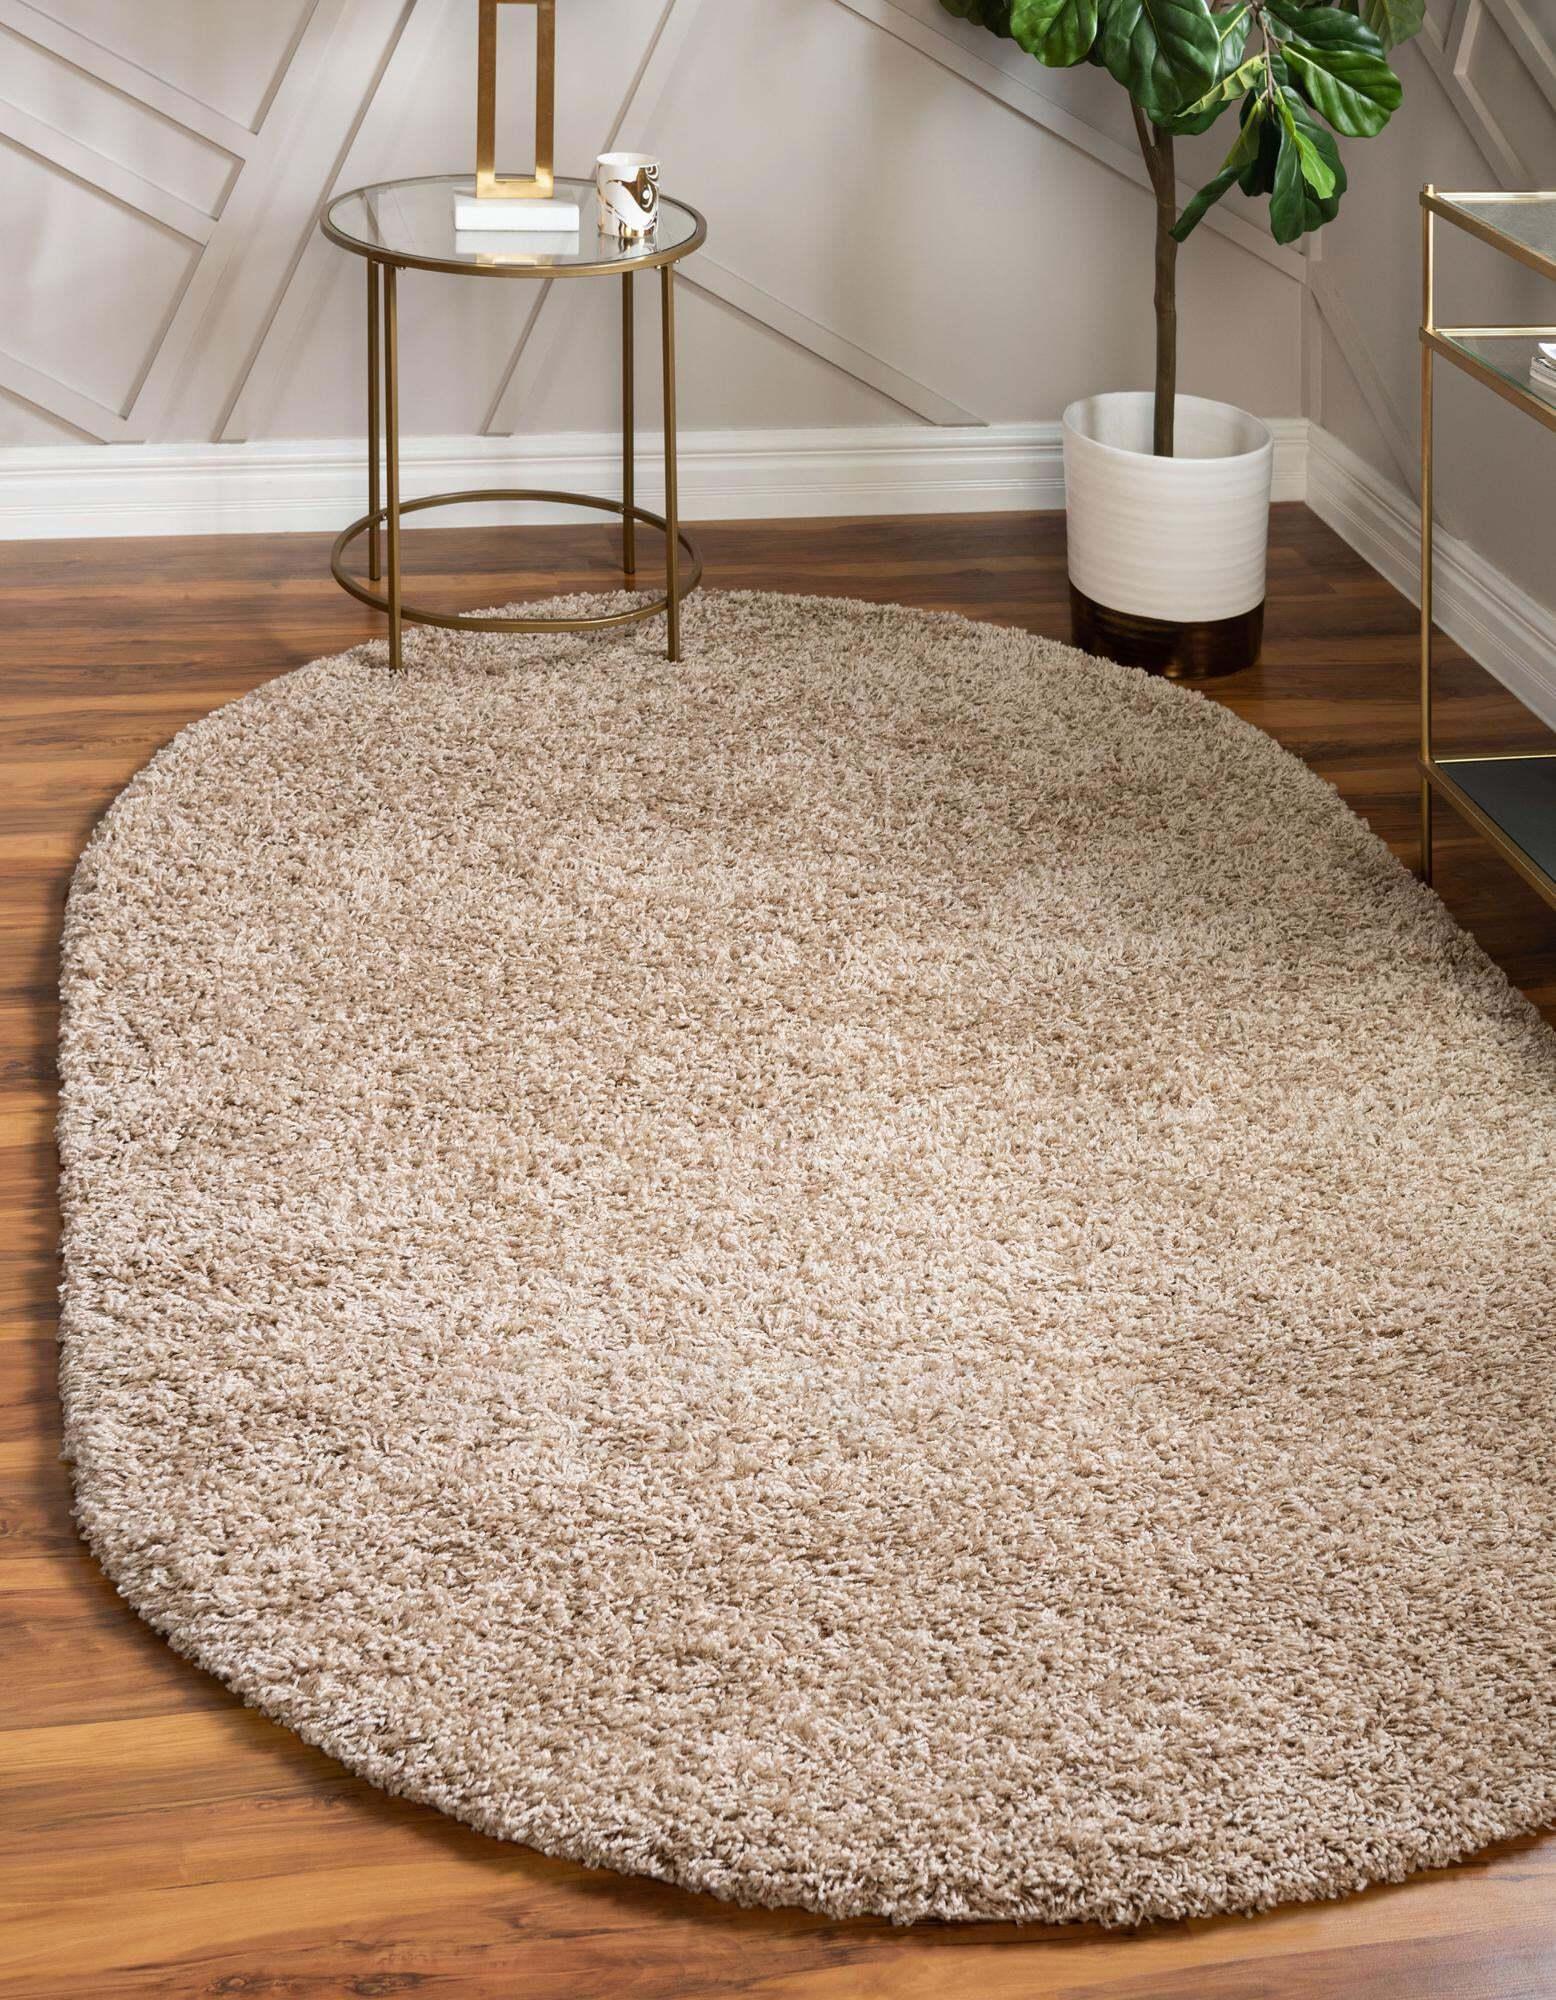 Unique Loom Indoor Rugs - Solid Shag Solid Oval 8x10 Oval Rug Taupe